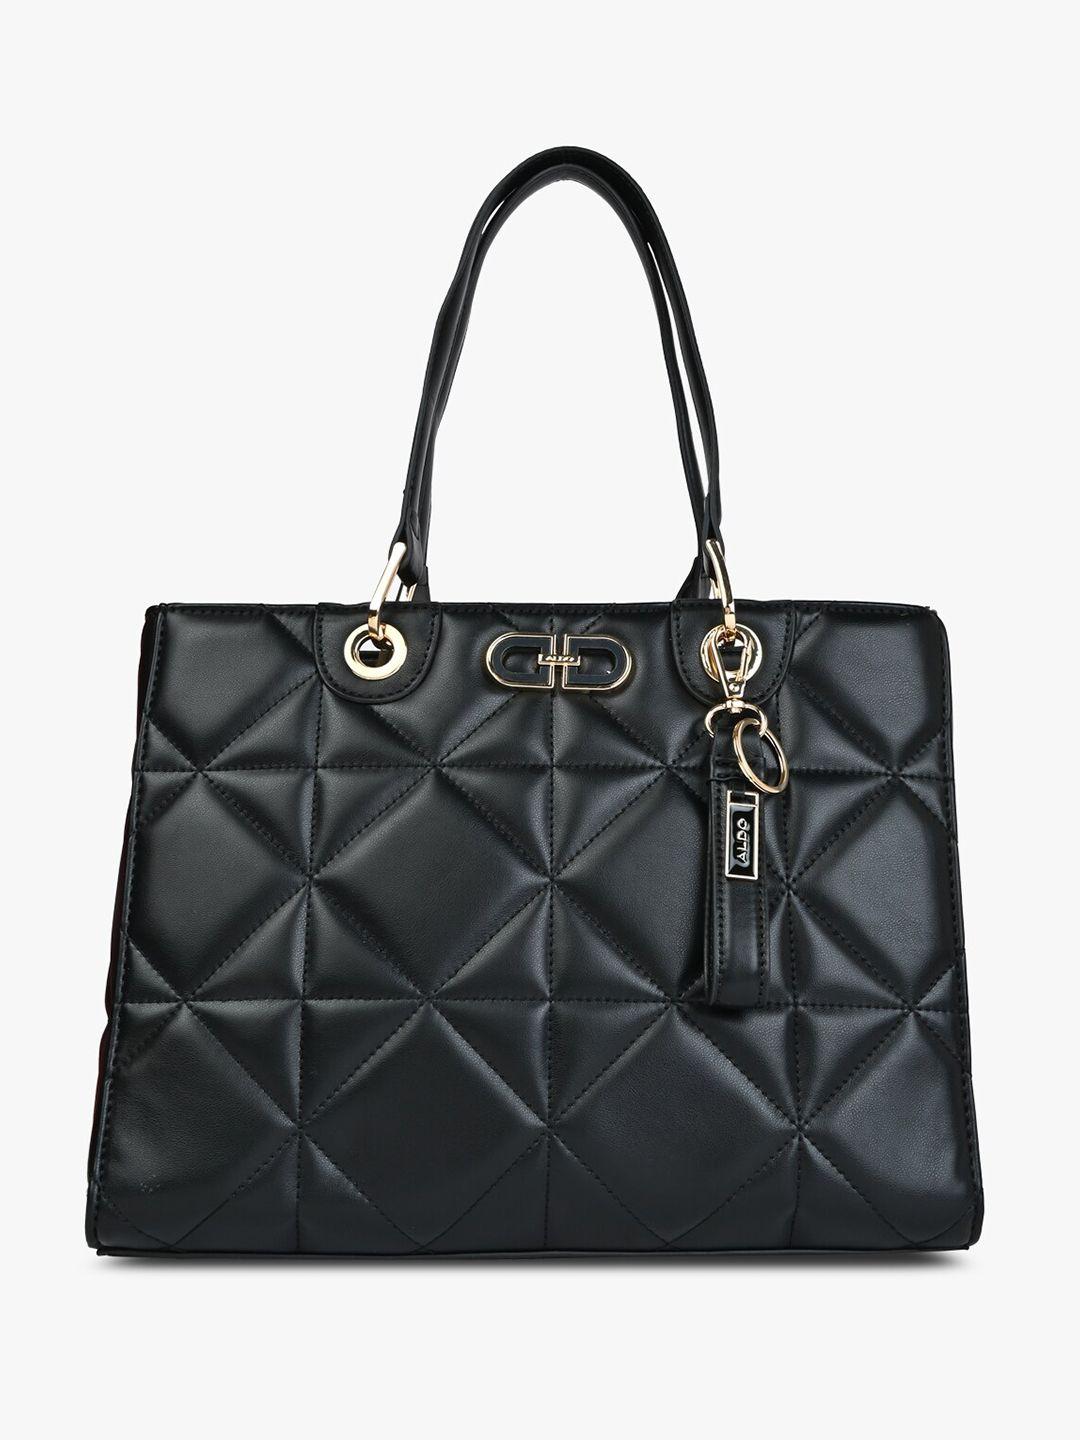 aldo textured structured handheld bag with quilted